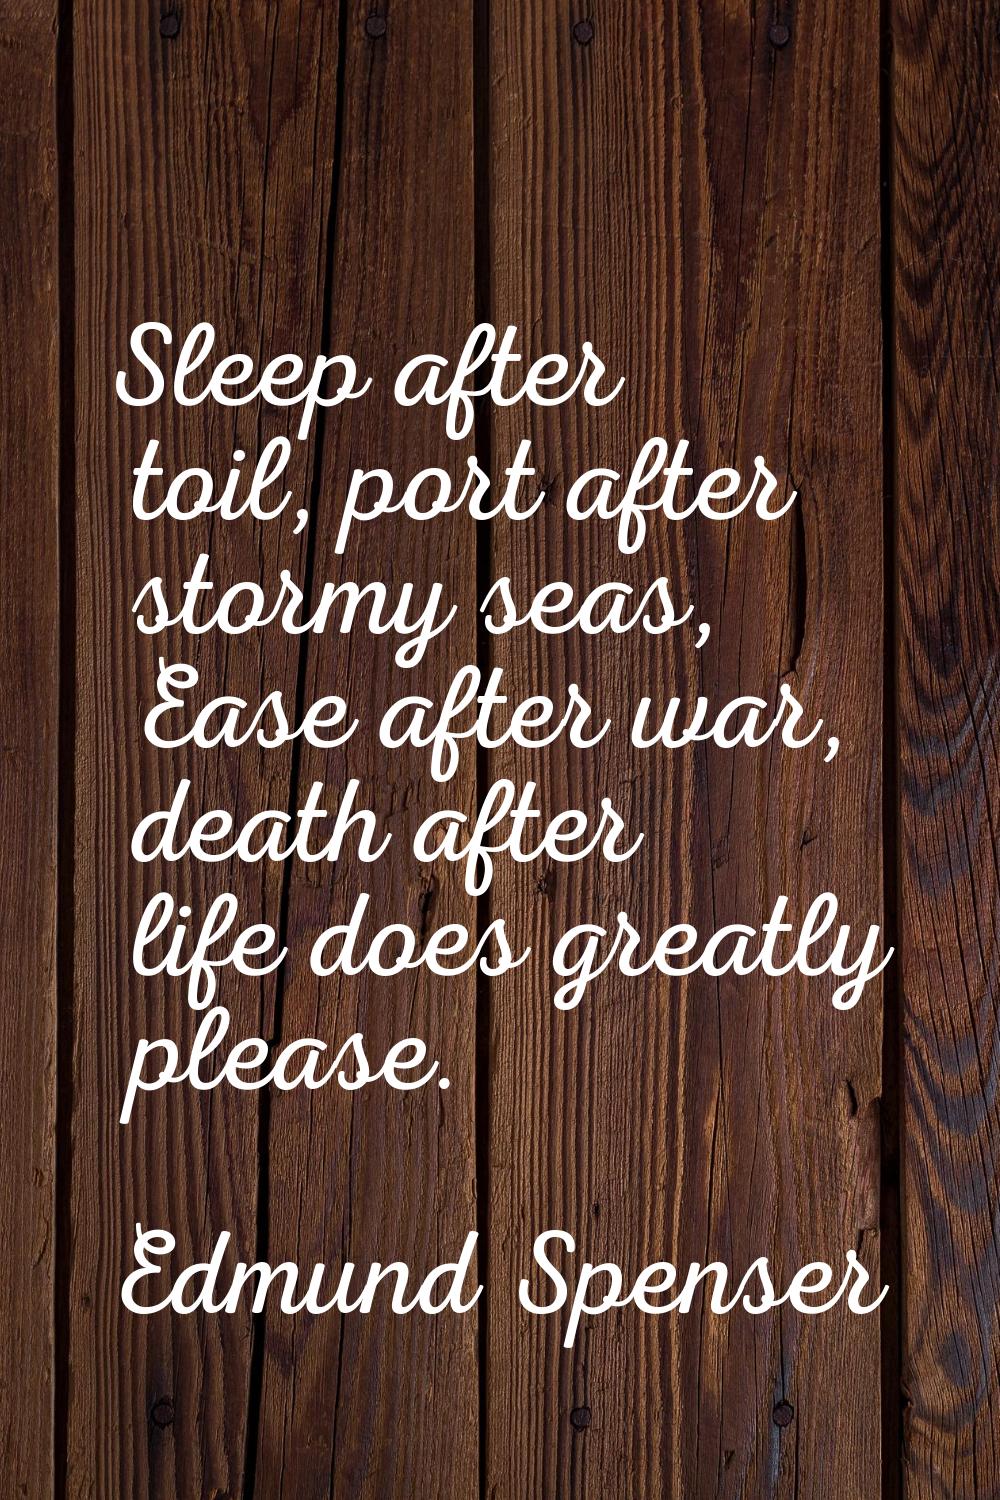 Sleep after toil, port after stormy seas, Ease after war, death after life does greatly please.